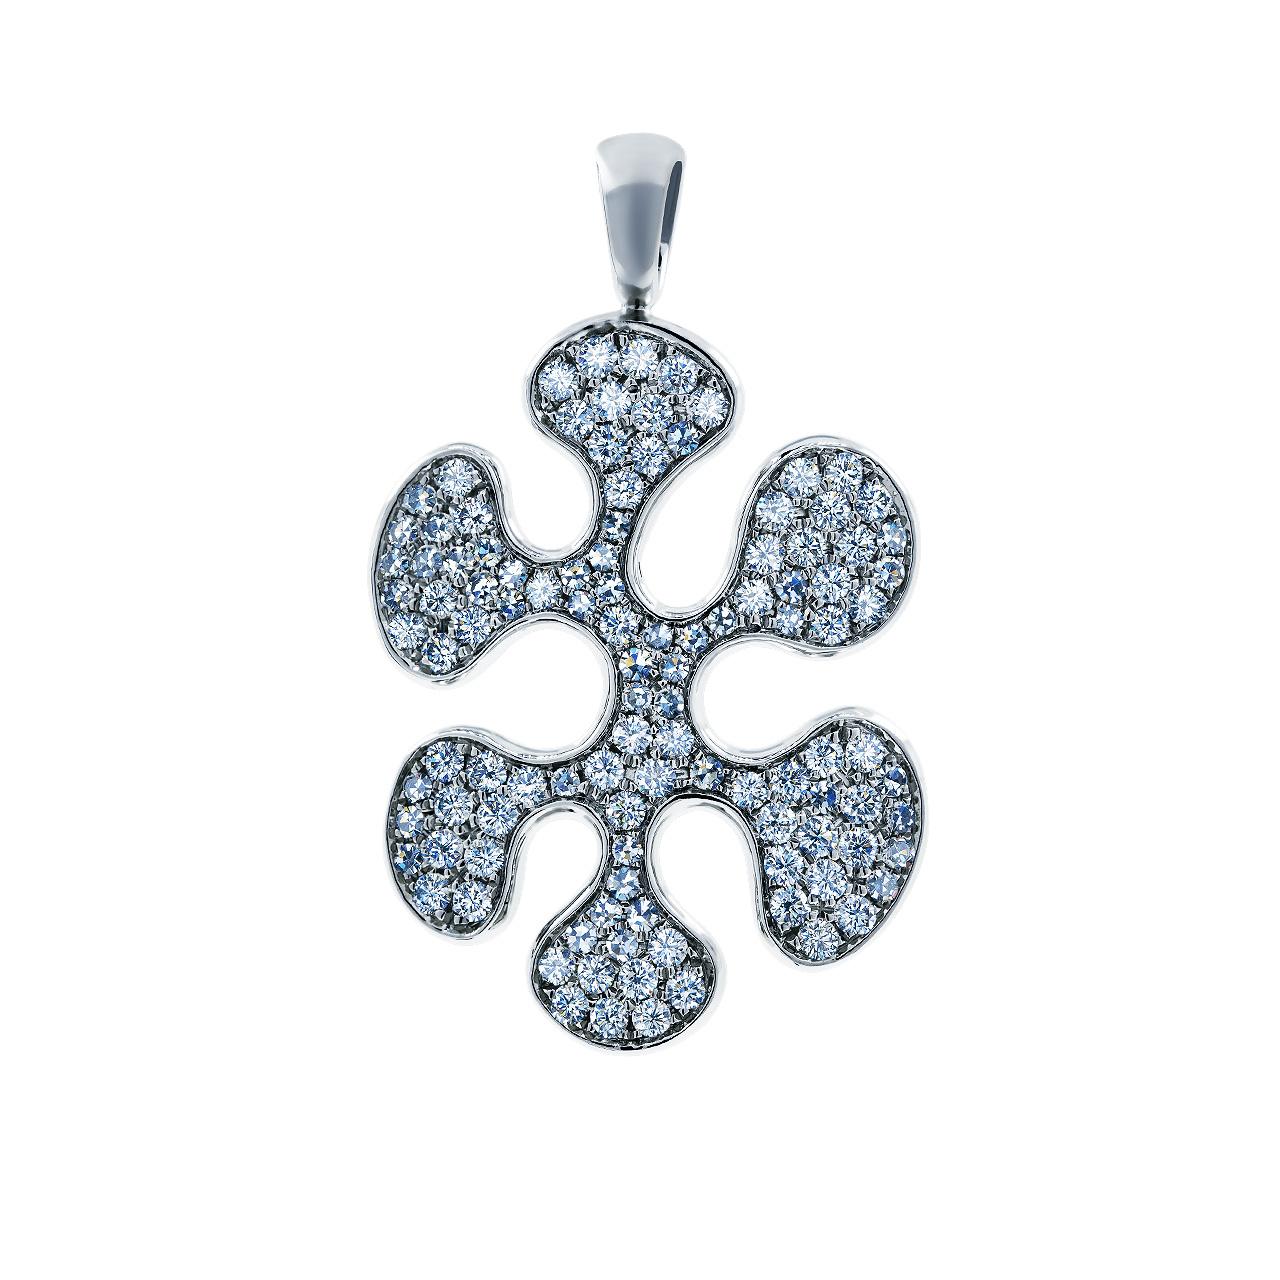 - 110 Round Diamonds - 1.13 ct, G/VVS1-VS1
- 18K White Gold 
- Weight: 8.20 g
Elegant 18k white gold pendant encrusted with 110 diamonds measures 1.13 carats. This unusual collection gives rise to all sorts of associations: droplets of ink escaping